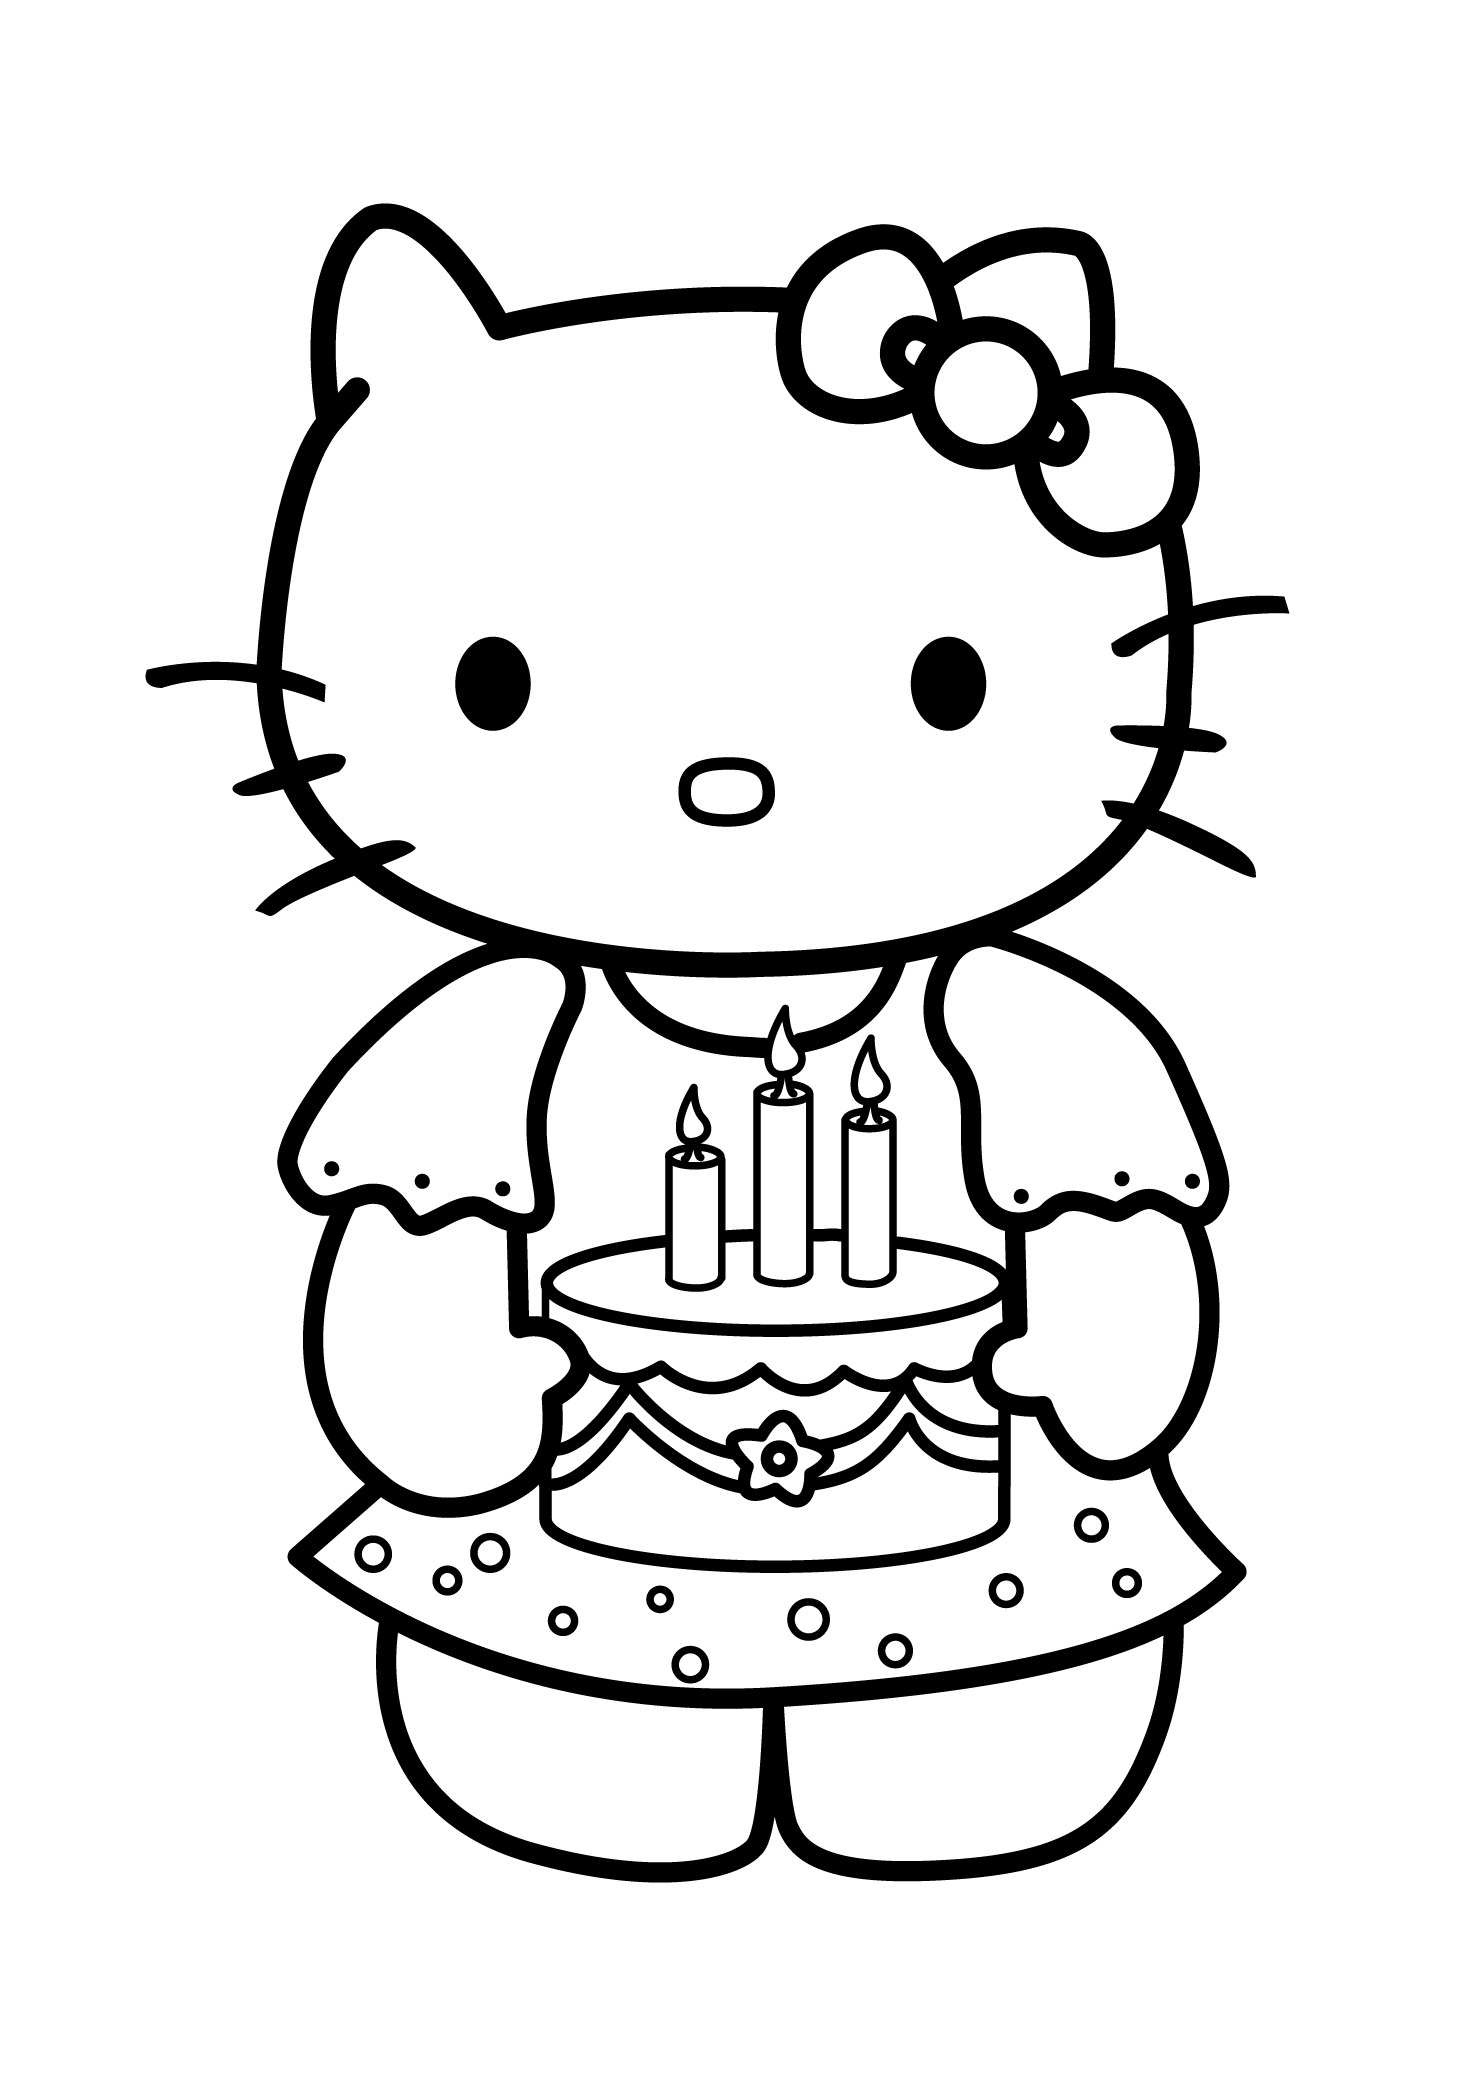 Hello Kitty Birthday Cake With Candles Coloring Page